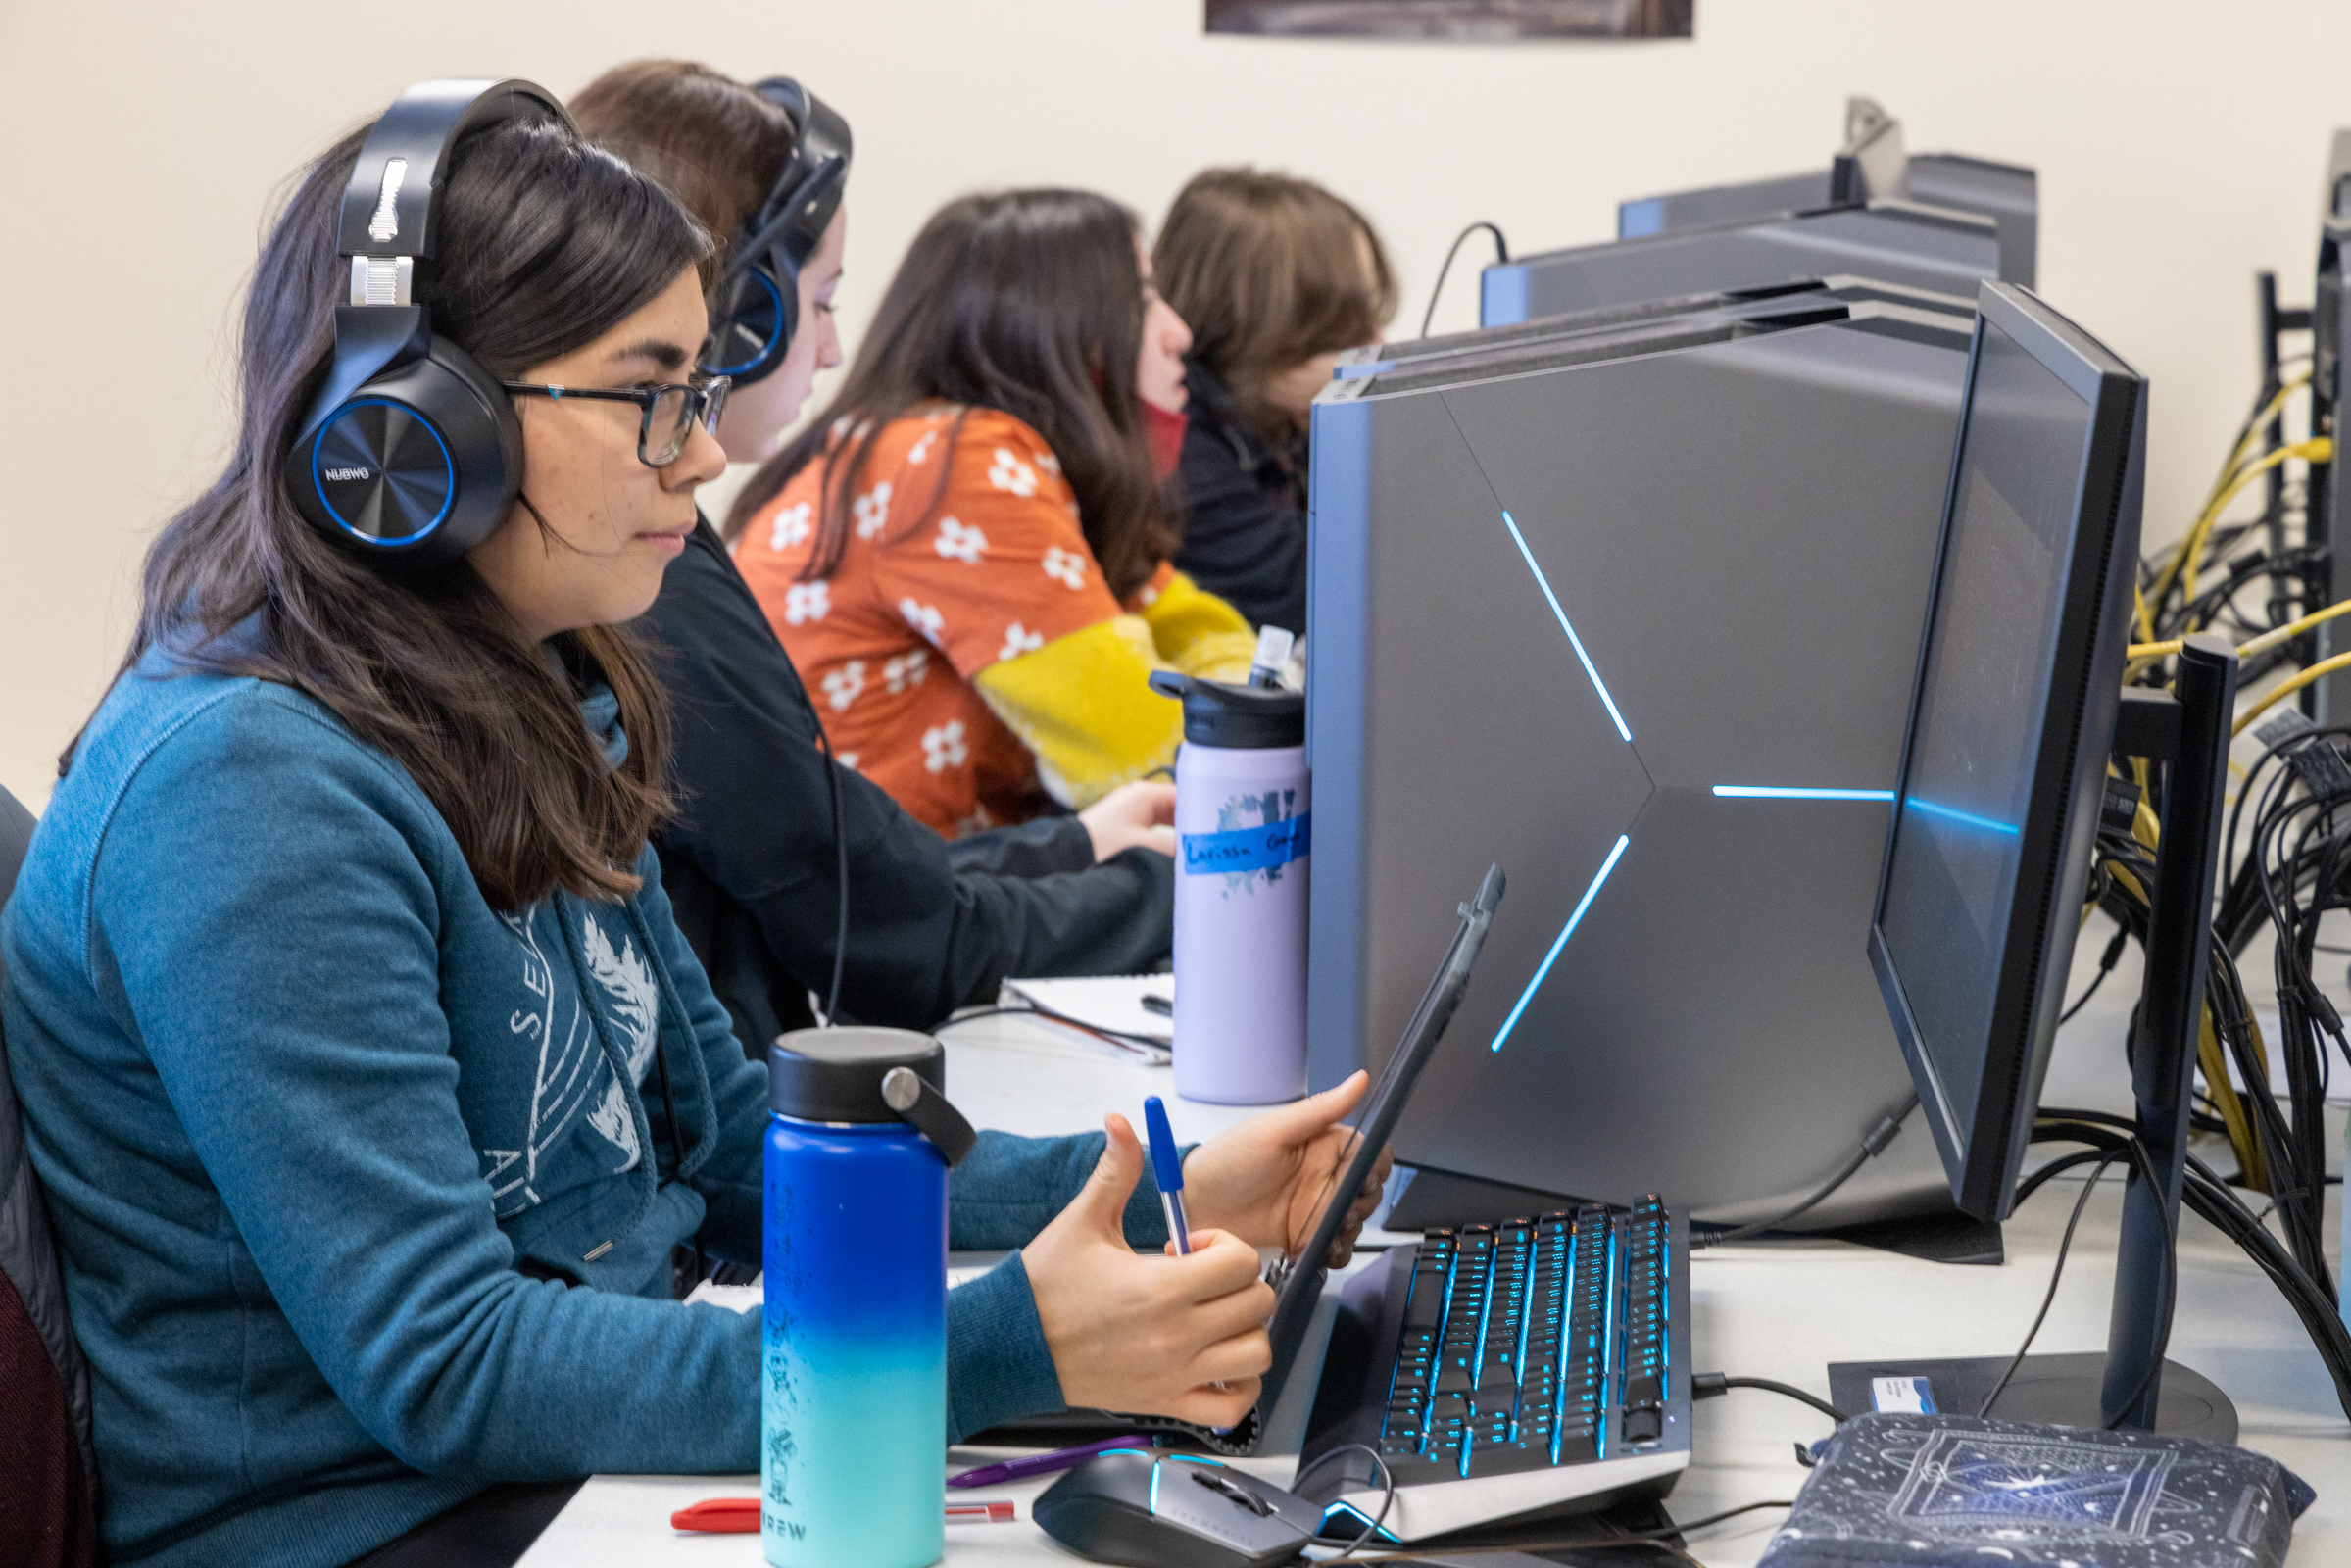 A female college students wearing headphones takes notes while watching a video on at a computer. In the background, three other students work at computers.